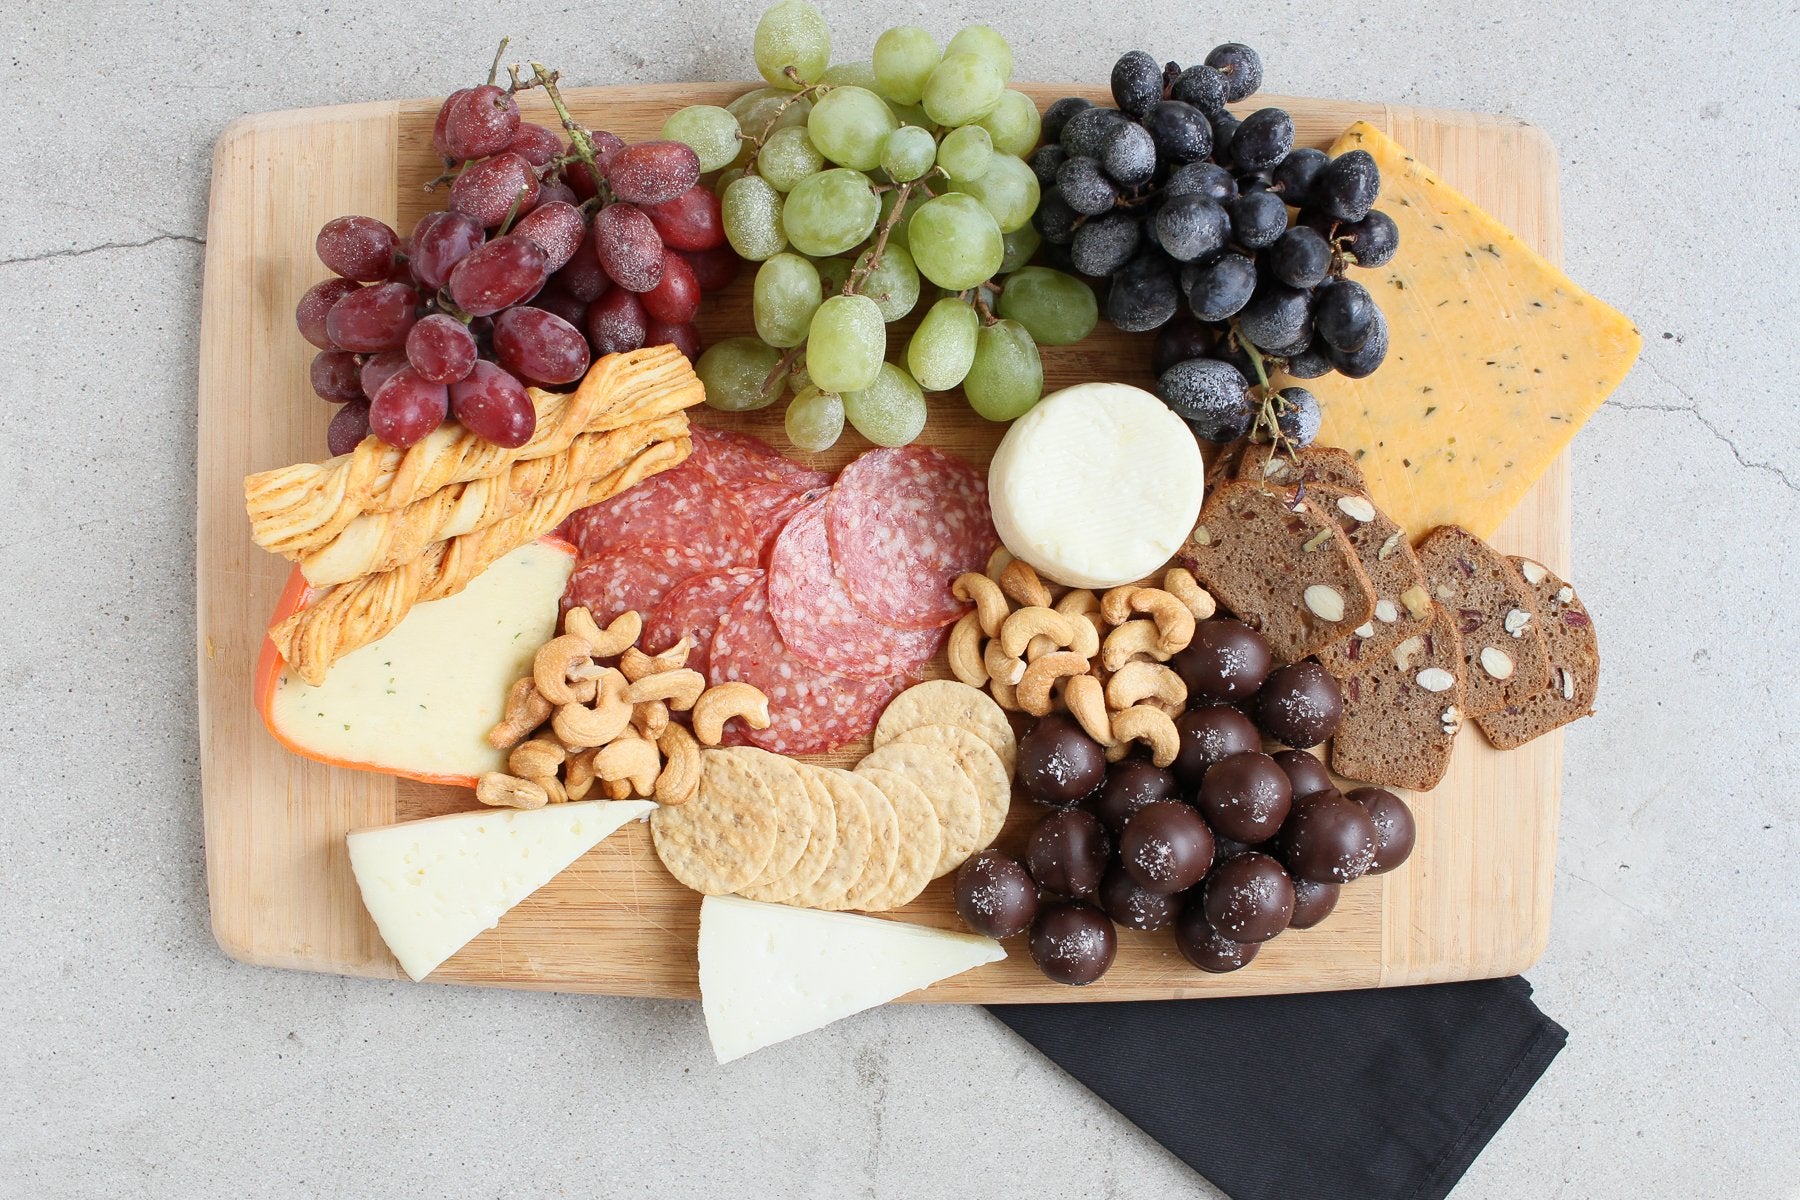 Two Fun Charcuterie Board Ideas for Your Next Party